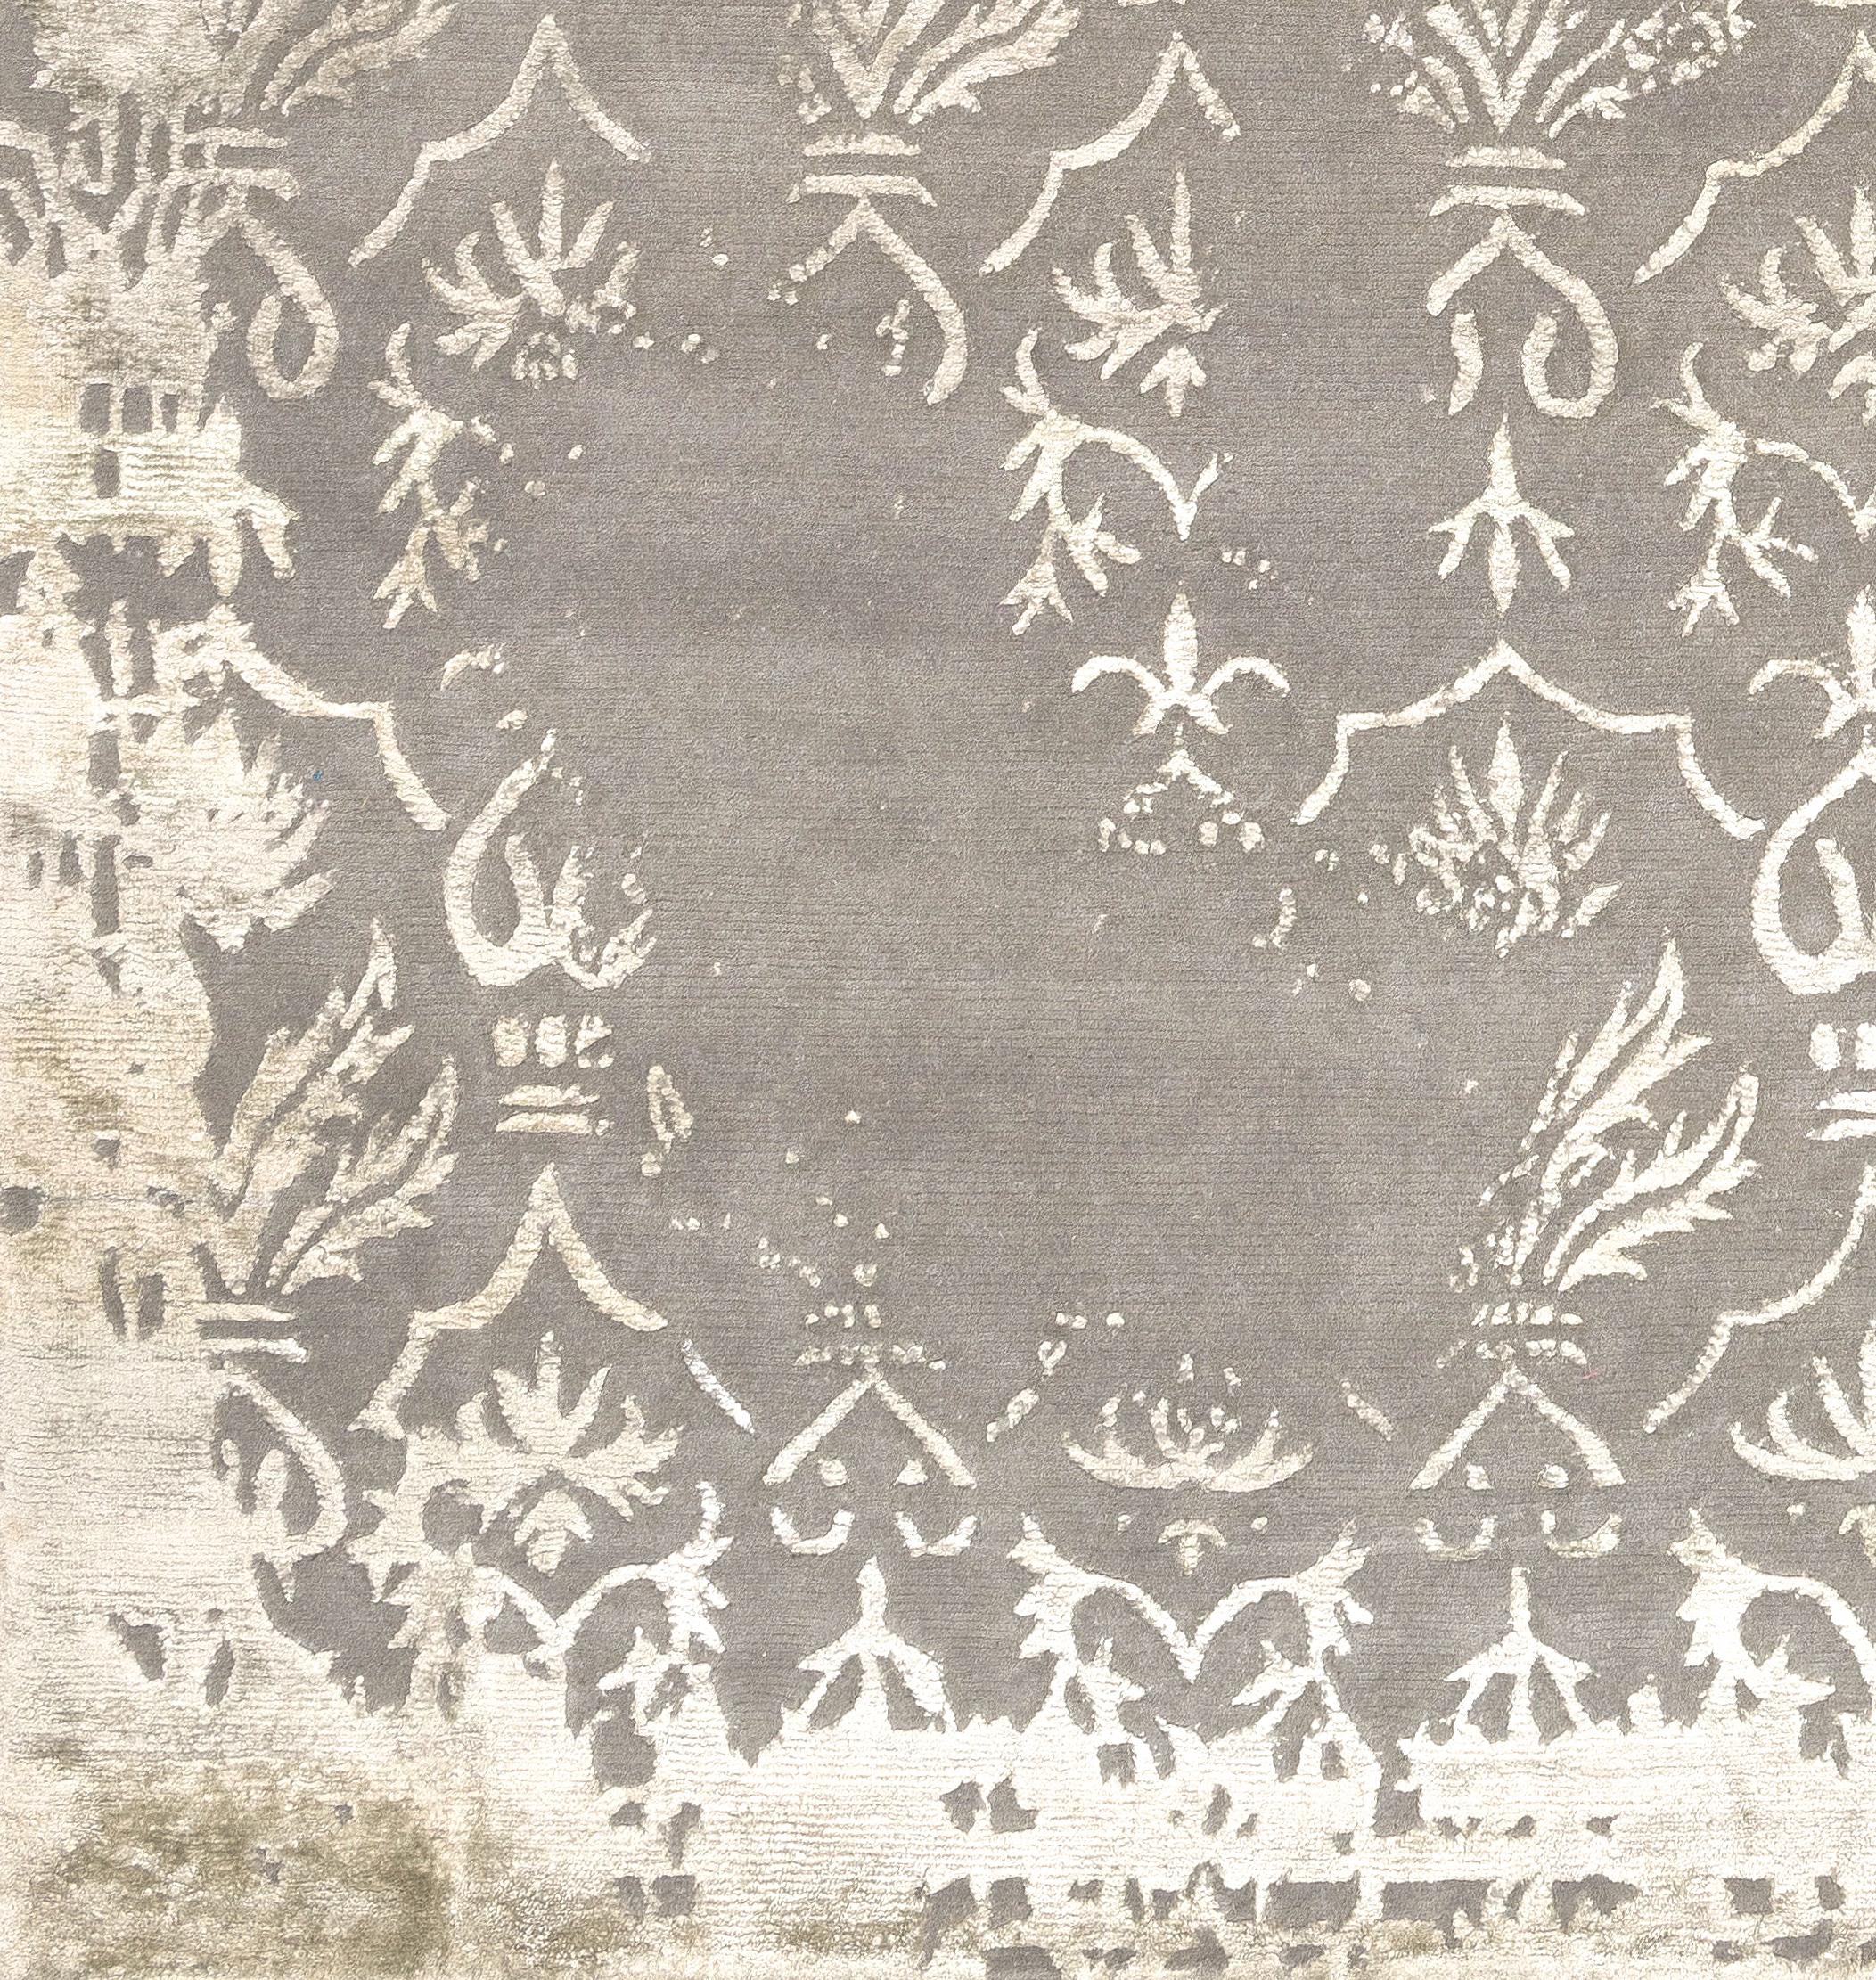 Faded version of Damask, classic design inspired to antique Fine Middle Eastern damask rugs from Illulian's Palace Collection.
This rug is hand-knotted in Nepal by our artisans by using 50% silk and 50% fine Himalayan wool dyed using vegetable and